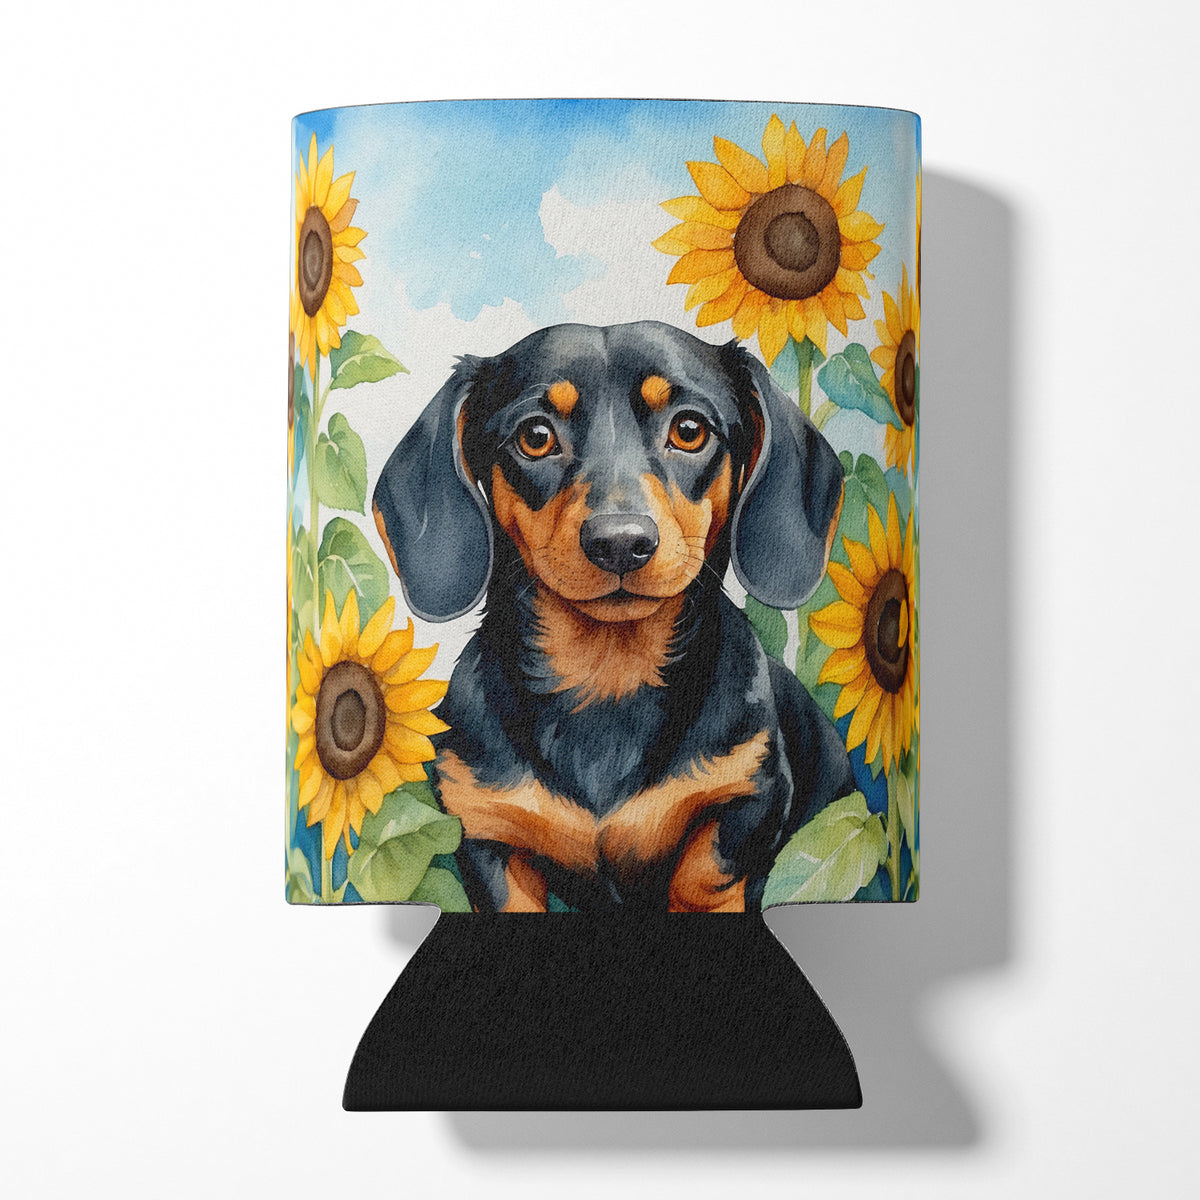 Buy this Dachshund in Sunflowers Can or Bottle Hugger